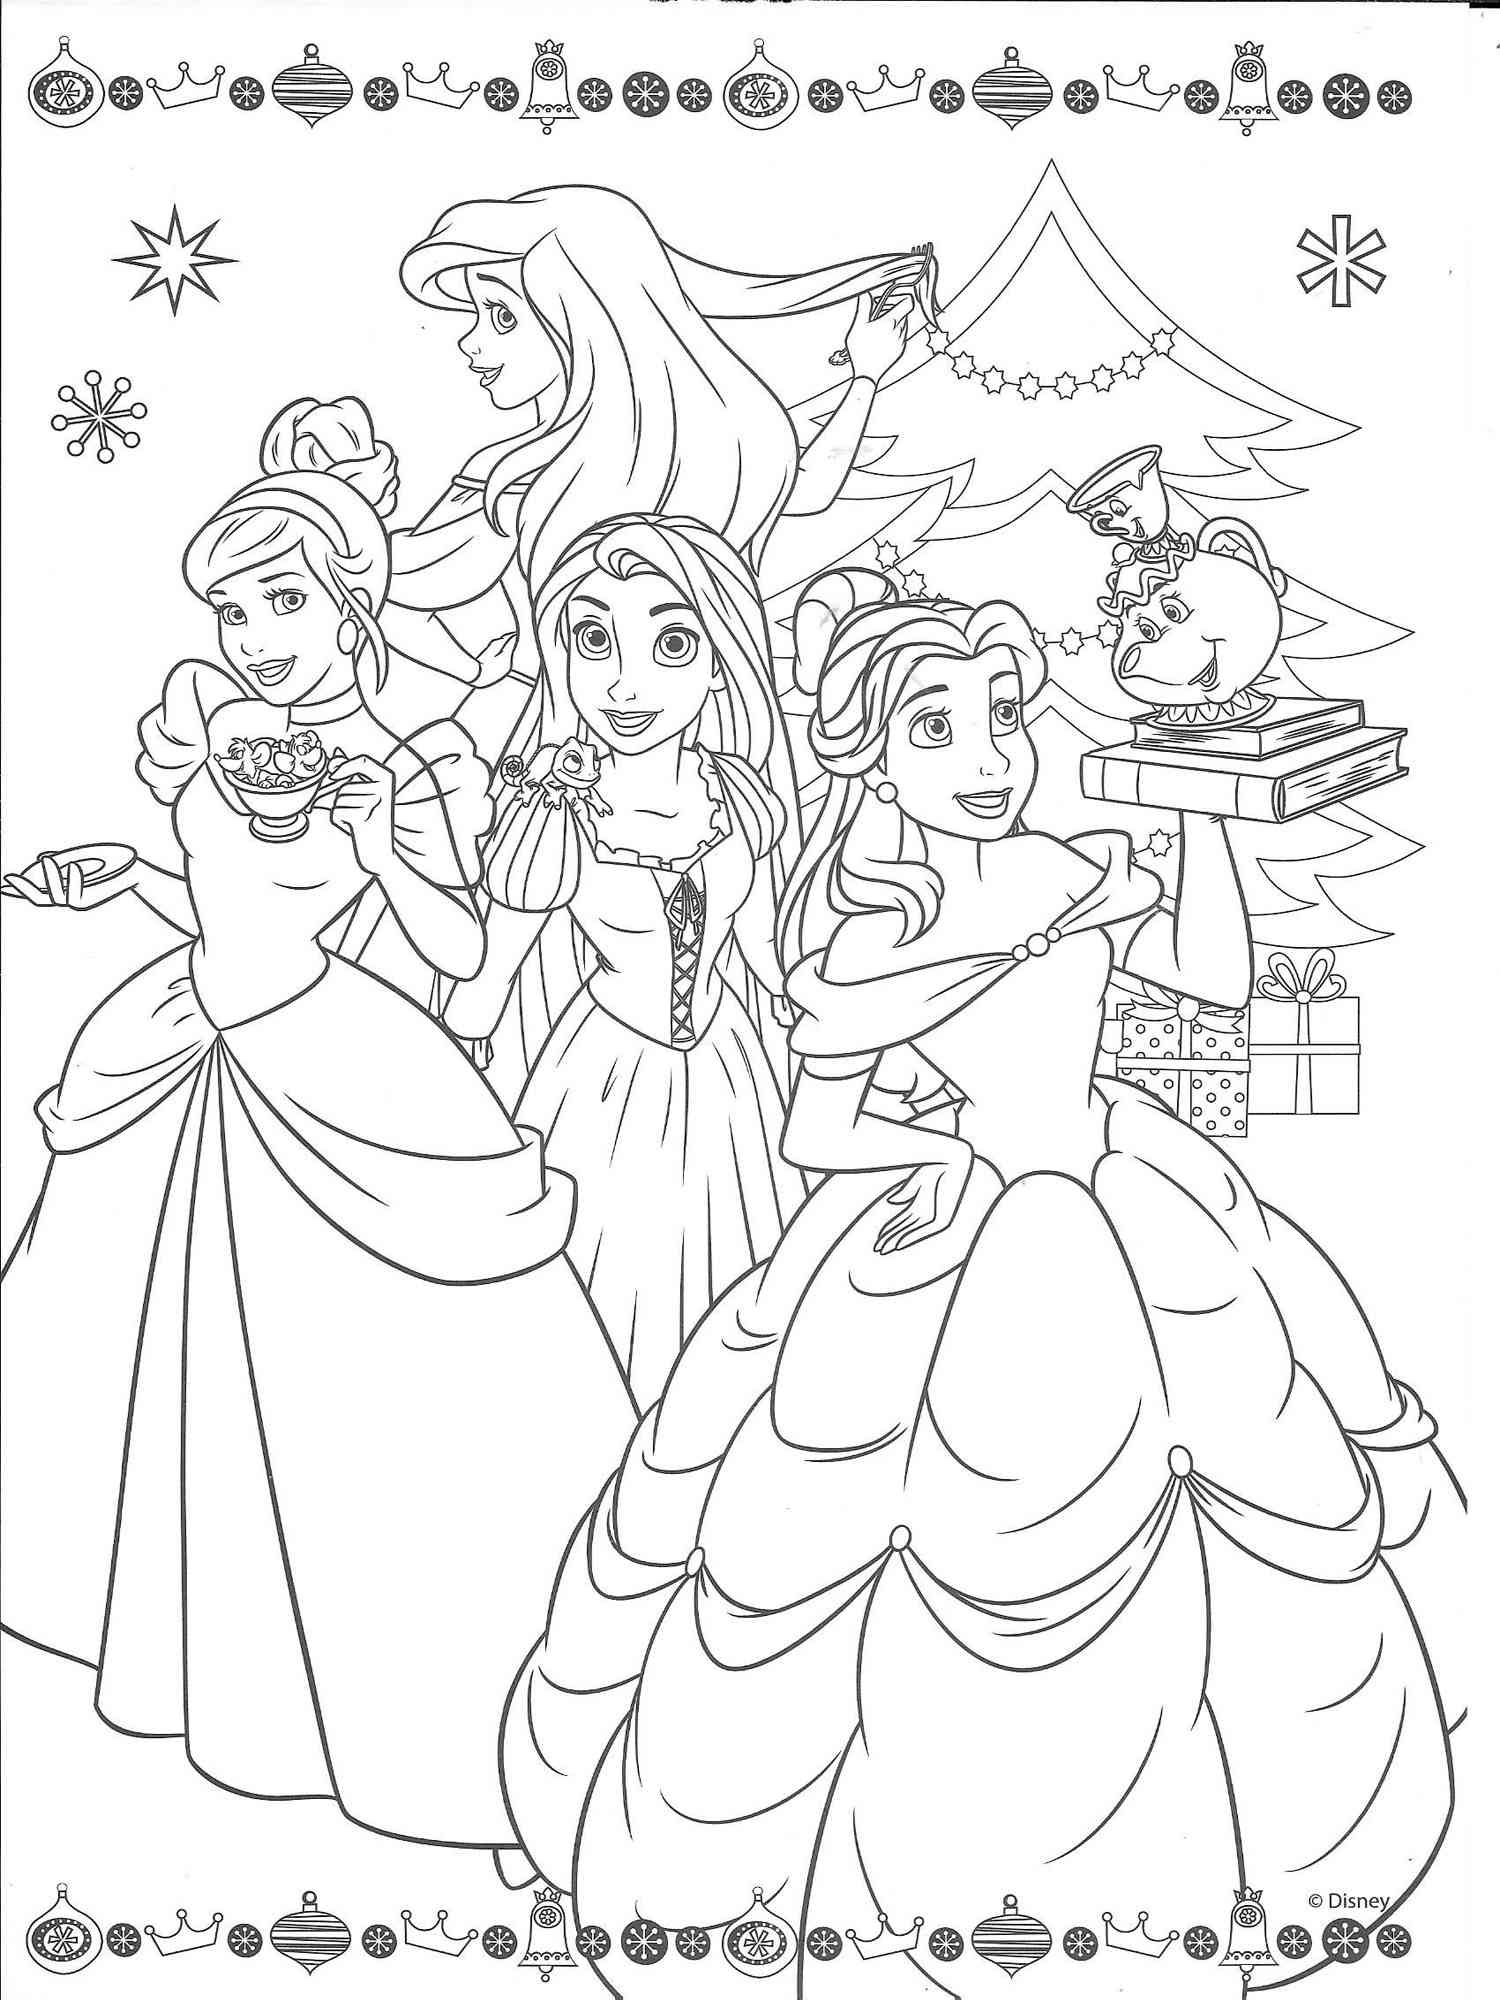 Disney Christmas 16 coloring page